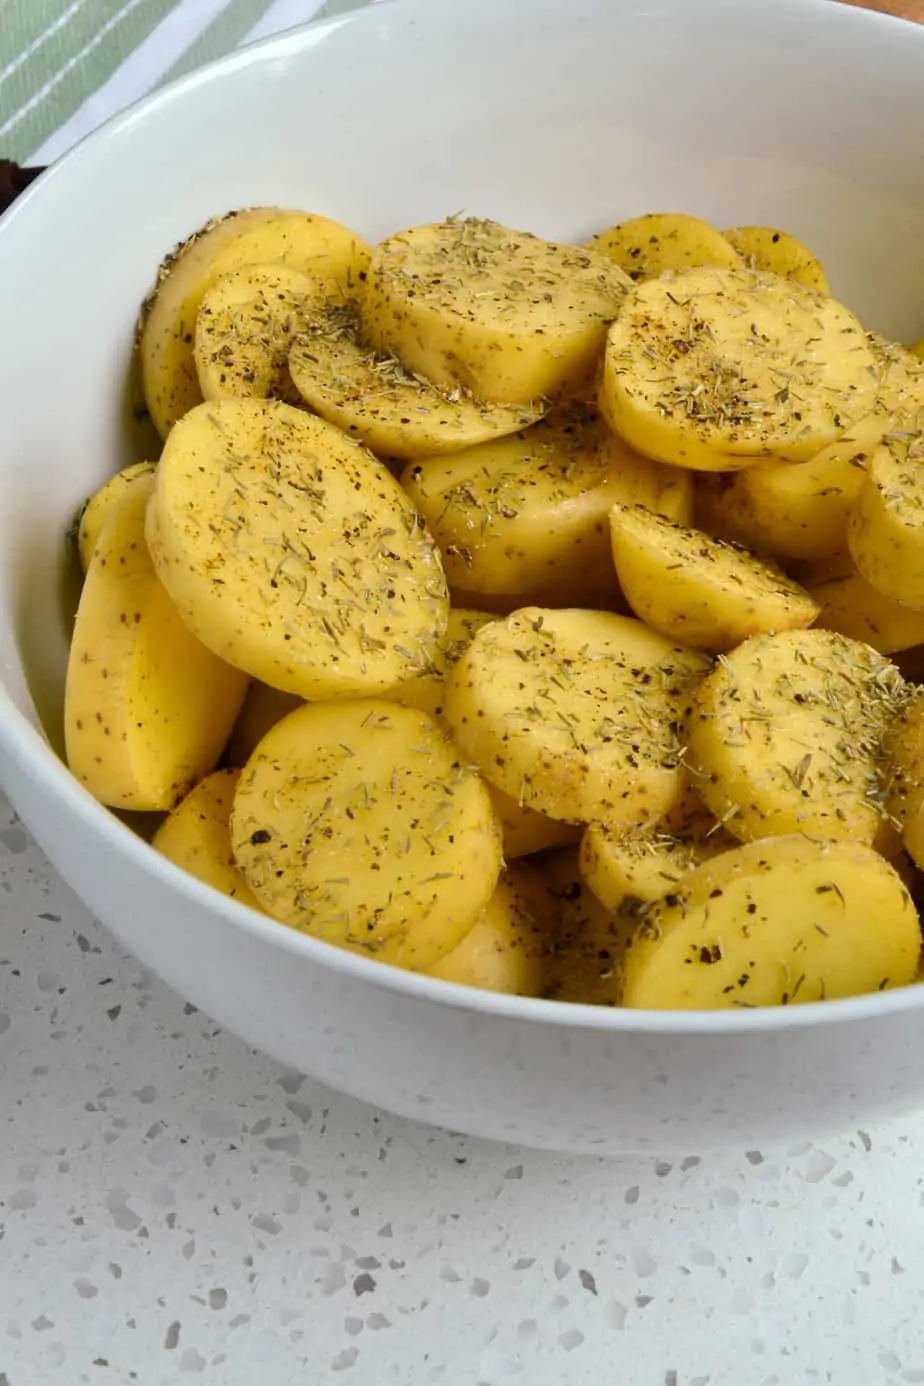 Raw Yukon Gold Potatoes mixed with oil and dried herbs